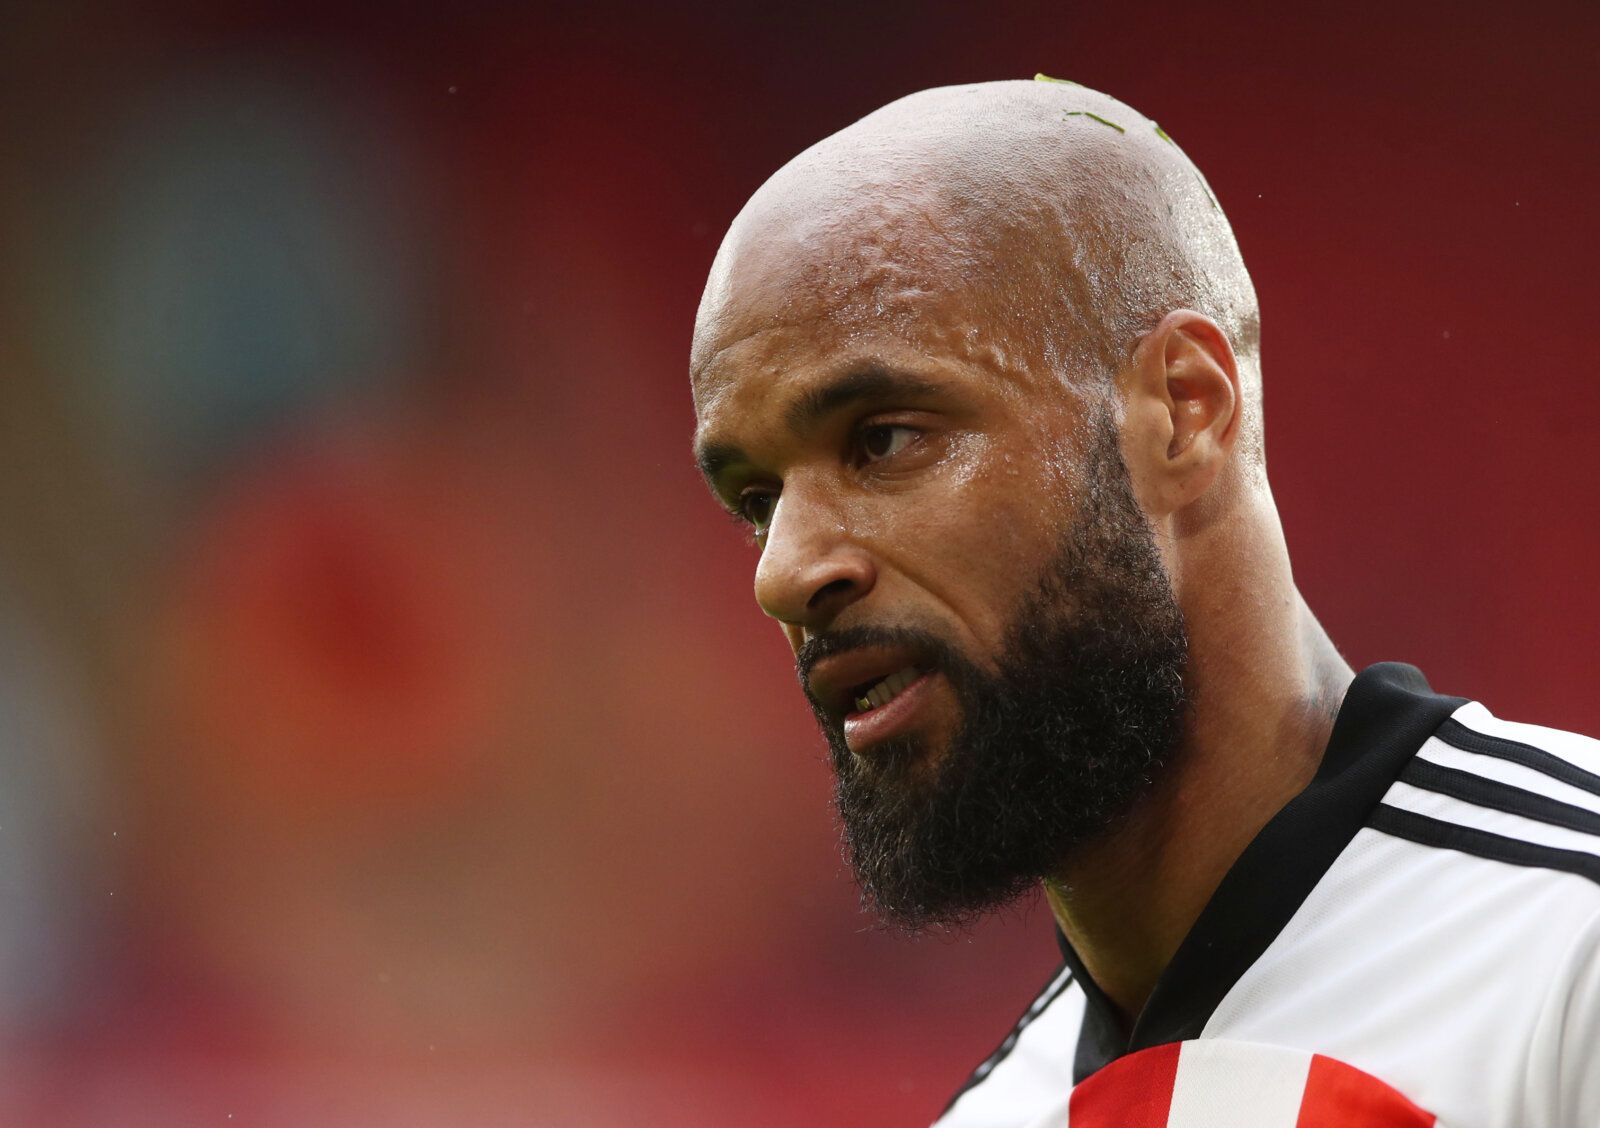 Soccer Football - Premier League - Sheffield United v Burnley - Bramall Lane, Sheffield, Britain - May 23, 2021 Sheffield United's David McGoldrick during the match Pool via REUTERS/Tim Goode EDITORIAL USE ONLY. No use with unauthorized audio, video, data, fixture lists, club/league logos or 'live' services. Online in-match use limited to 75 images, no video emulation. No use in betting, games or single club /league/player publications.  Please contact your account representative for further det